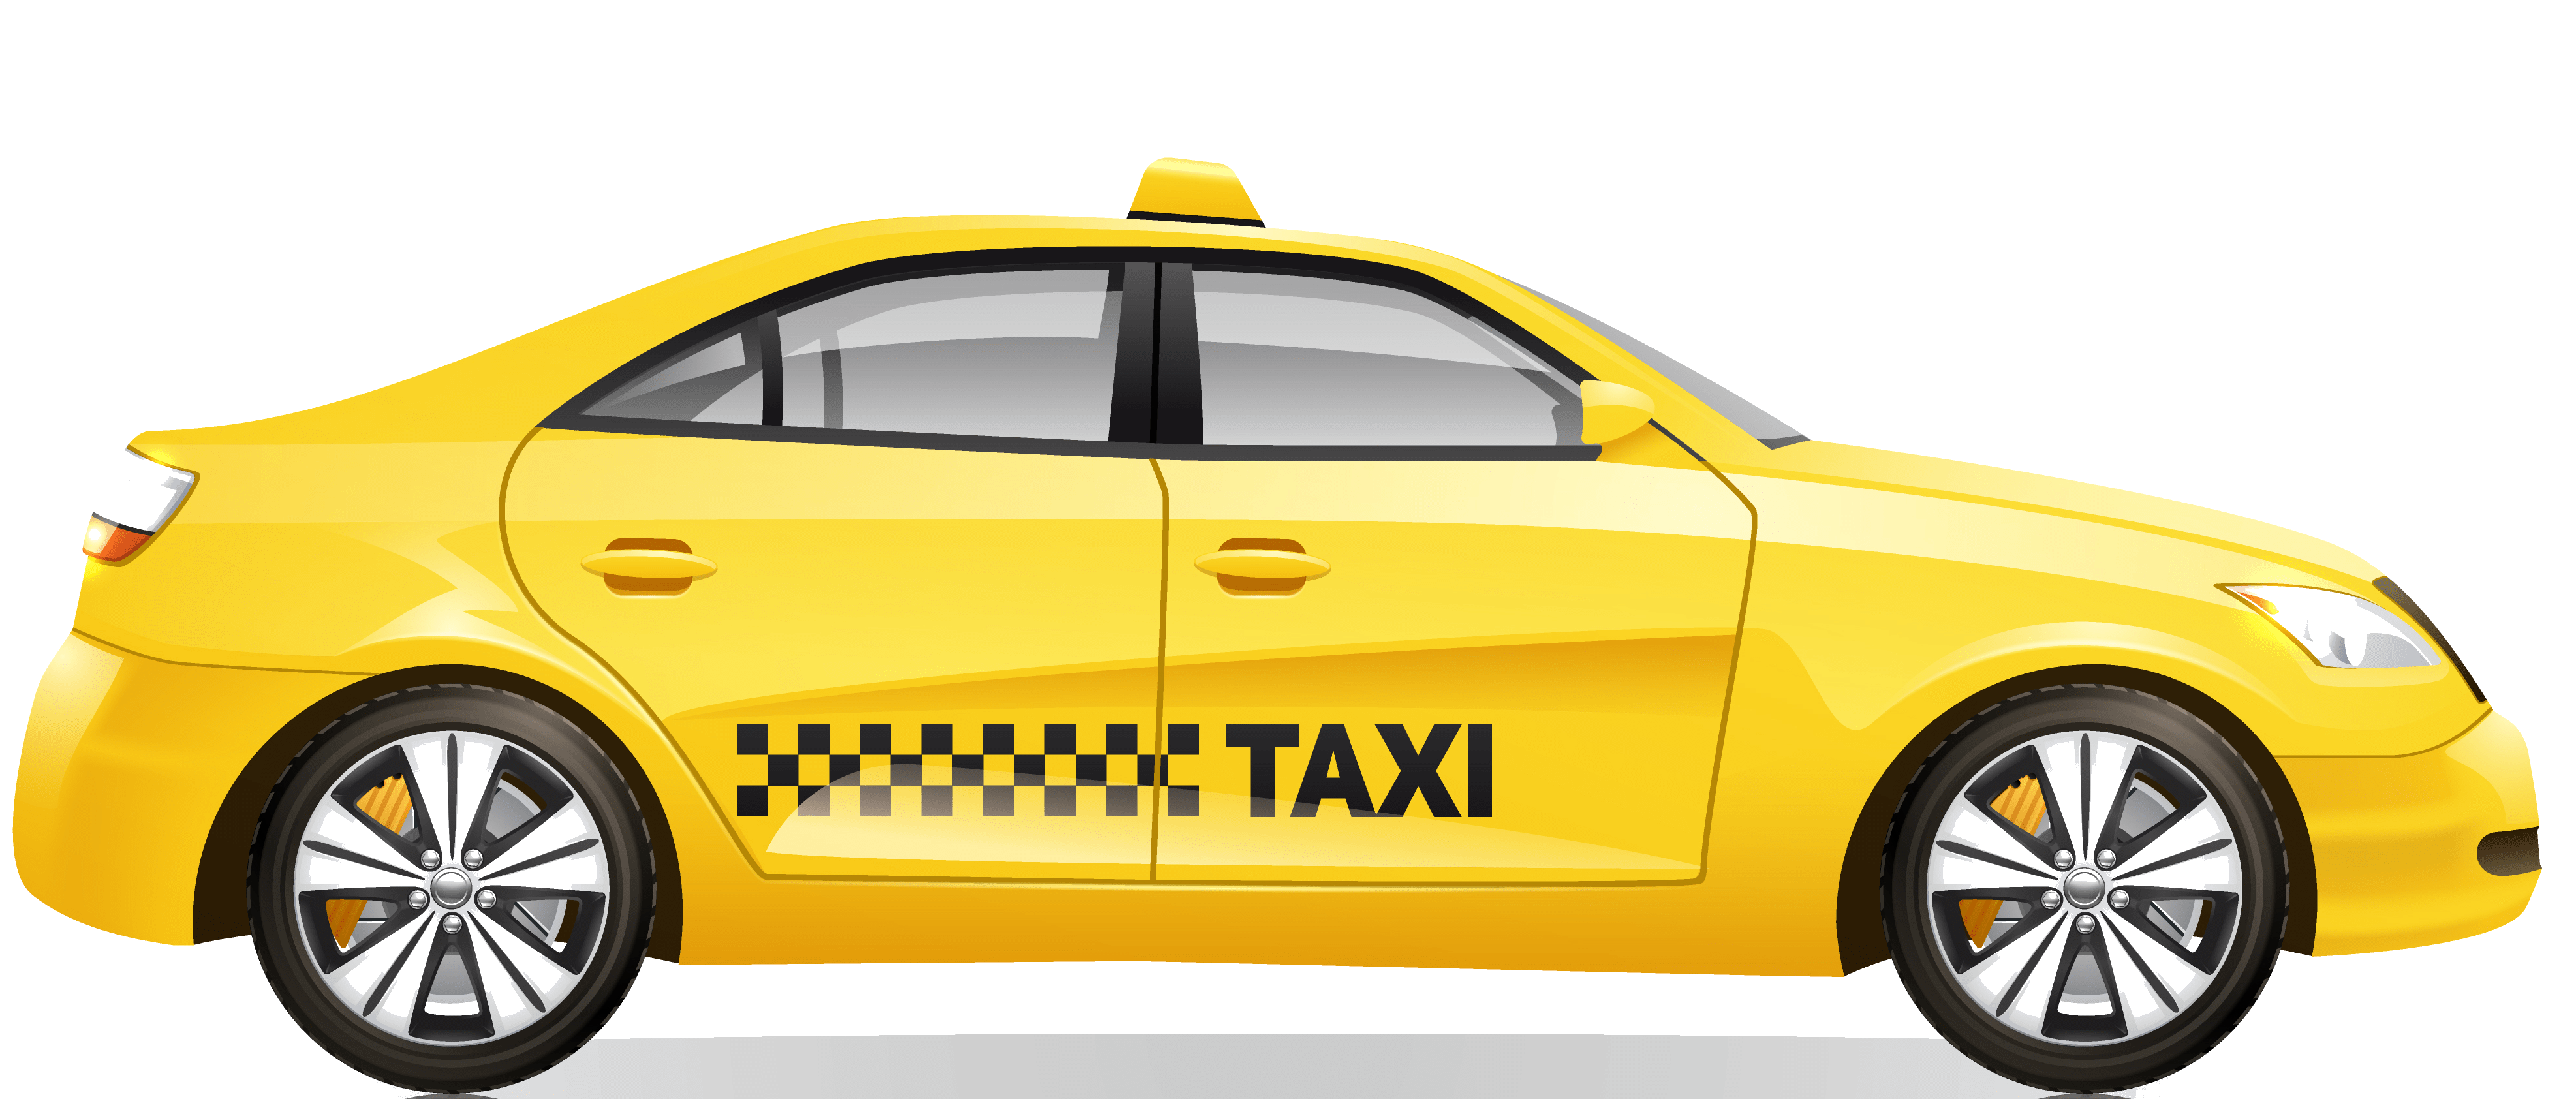 icone trajets taxi